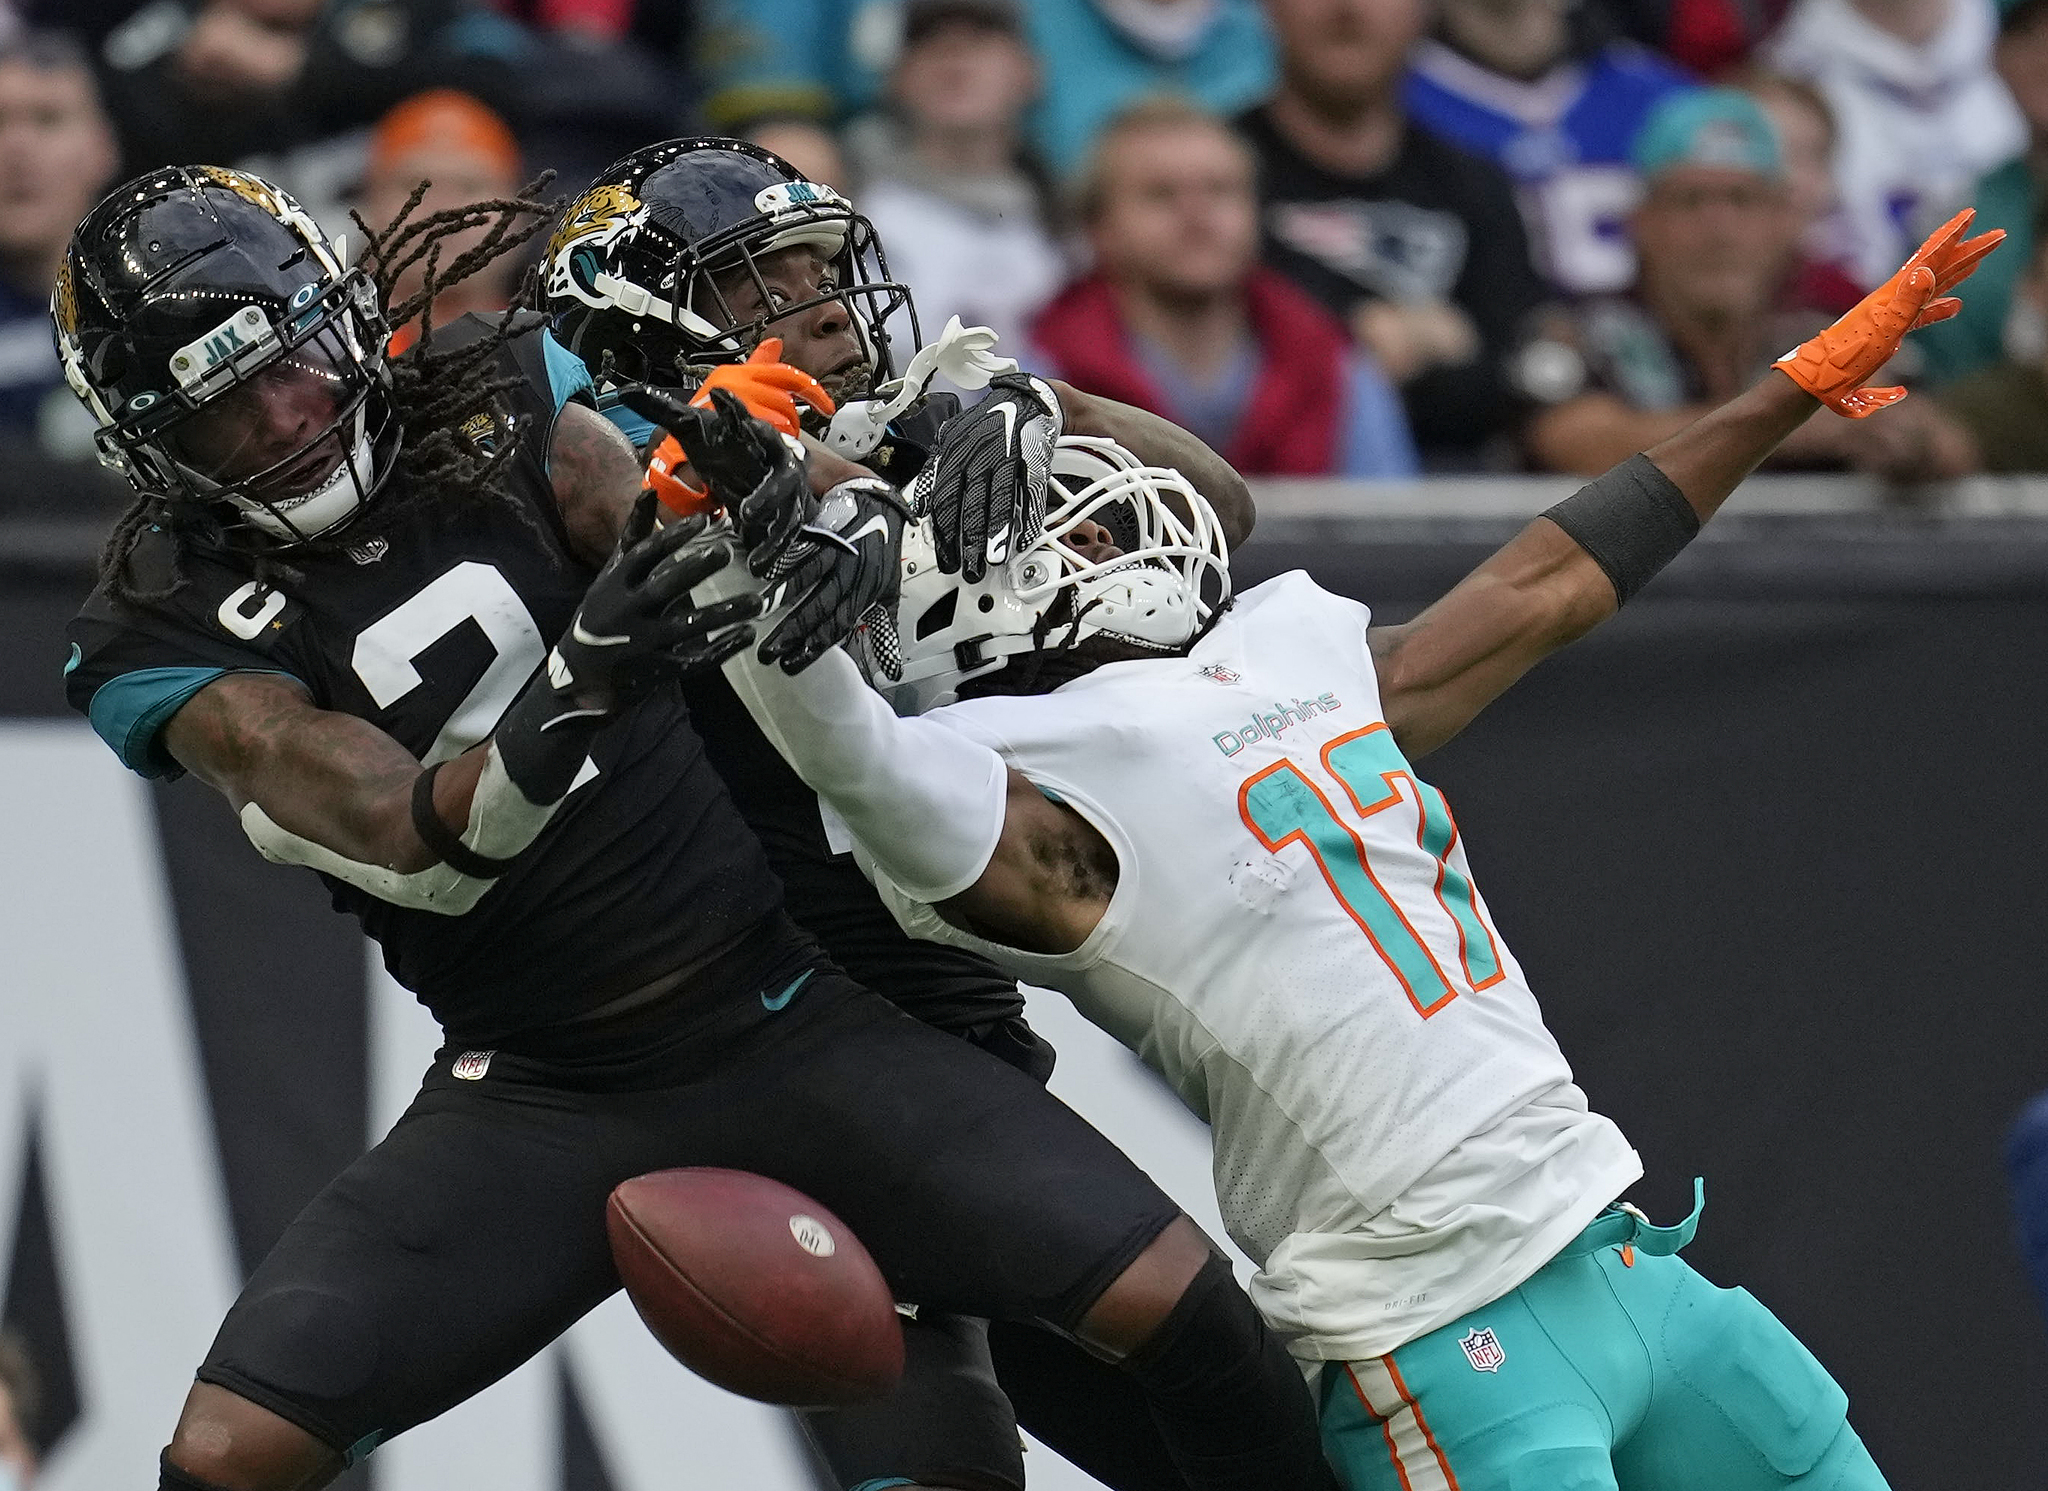 Panthers vs. Dolphins live stream: TV channel, how to watch